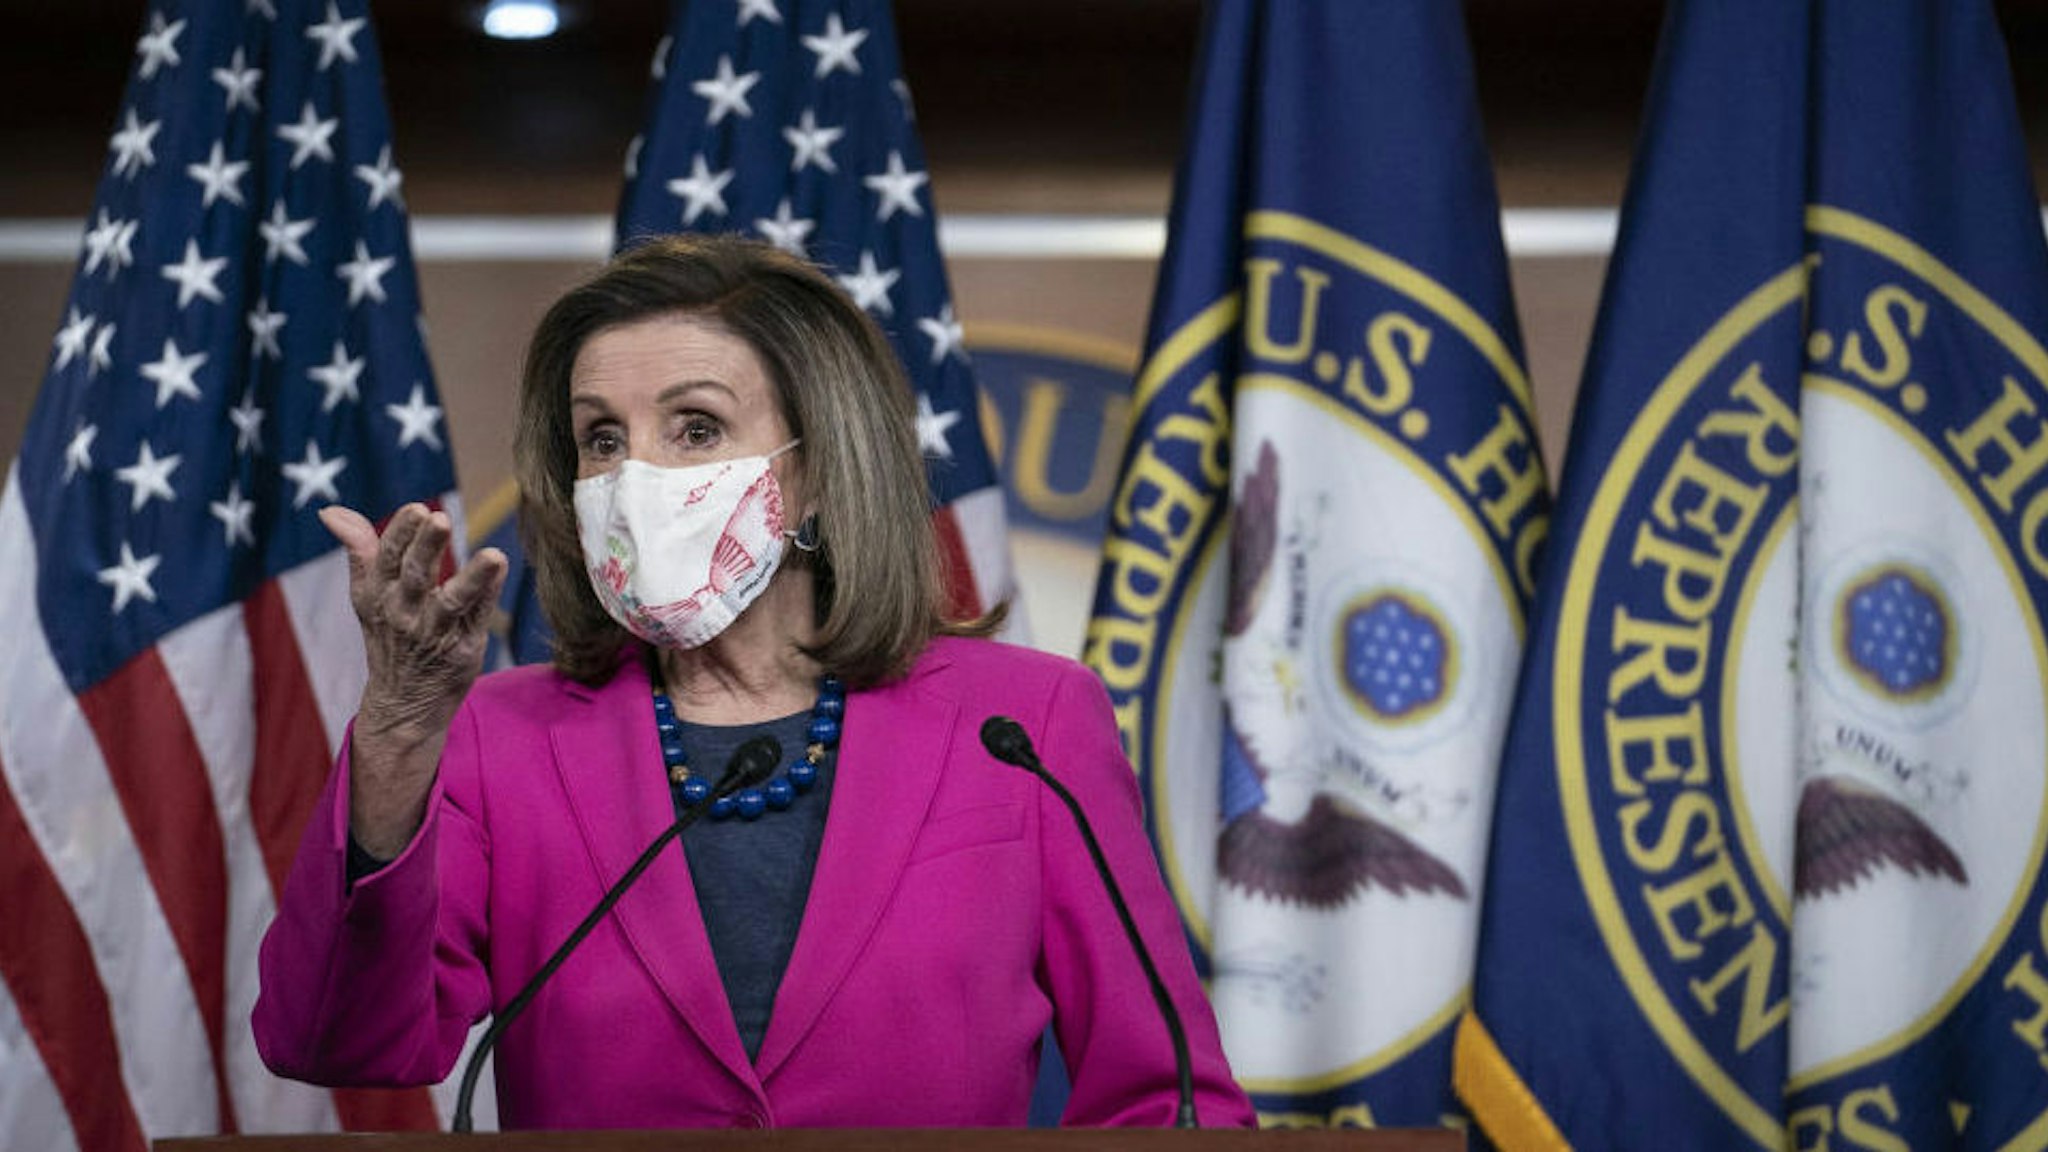 U.S. House Speaker Nancy Pelosi, a Democrat from California, wears a protective mask while speaking during a news conference at the U.S. Capitol in Washington, D.C., U.S., on Thursday, Feb. 25, 2021. House Democrats released an updated version of their coronavirus stimulus bill Wednesday, adding funds for foreign aid, tribal governments and housing, and other measures ahead of a vote later this week.